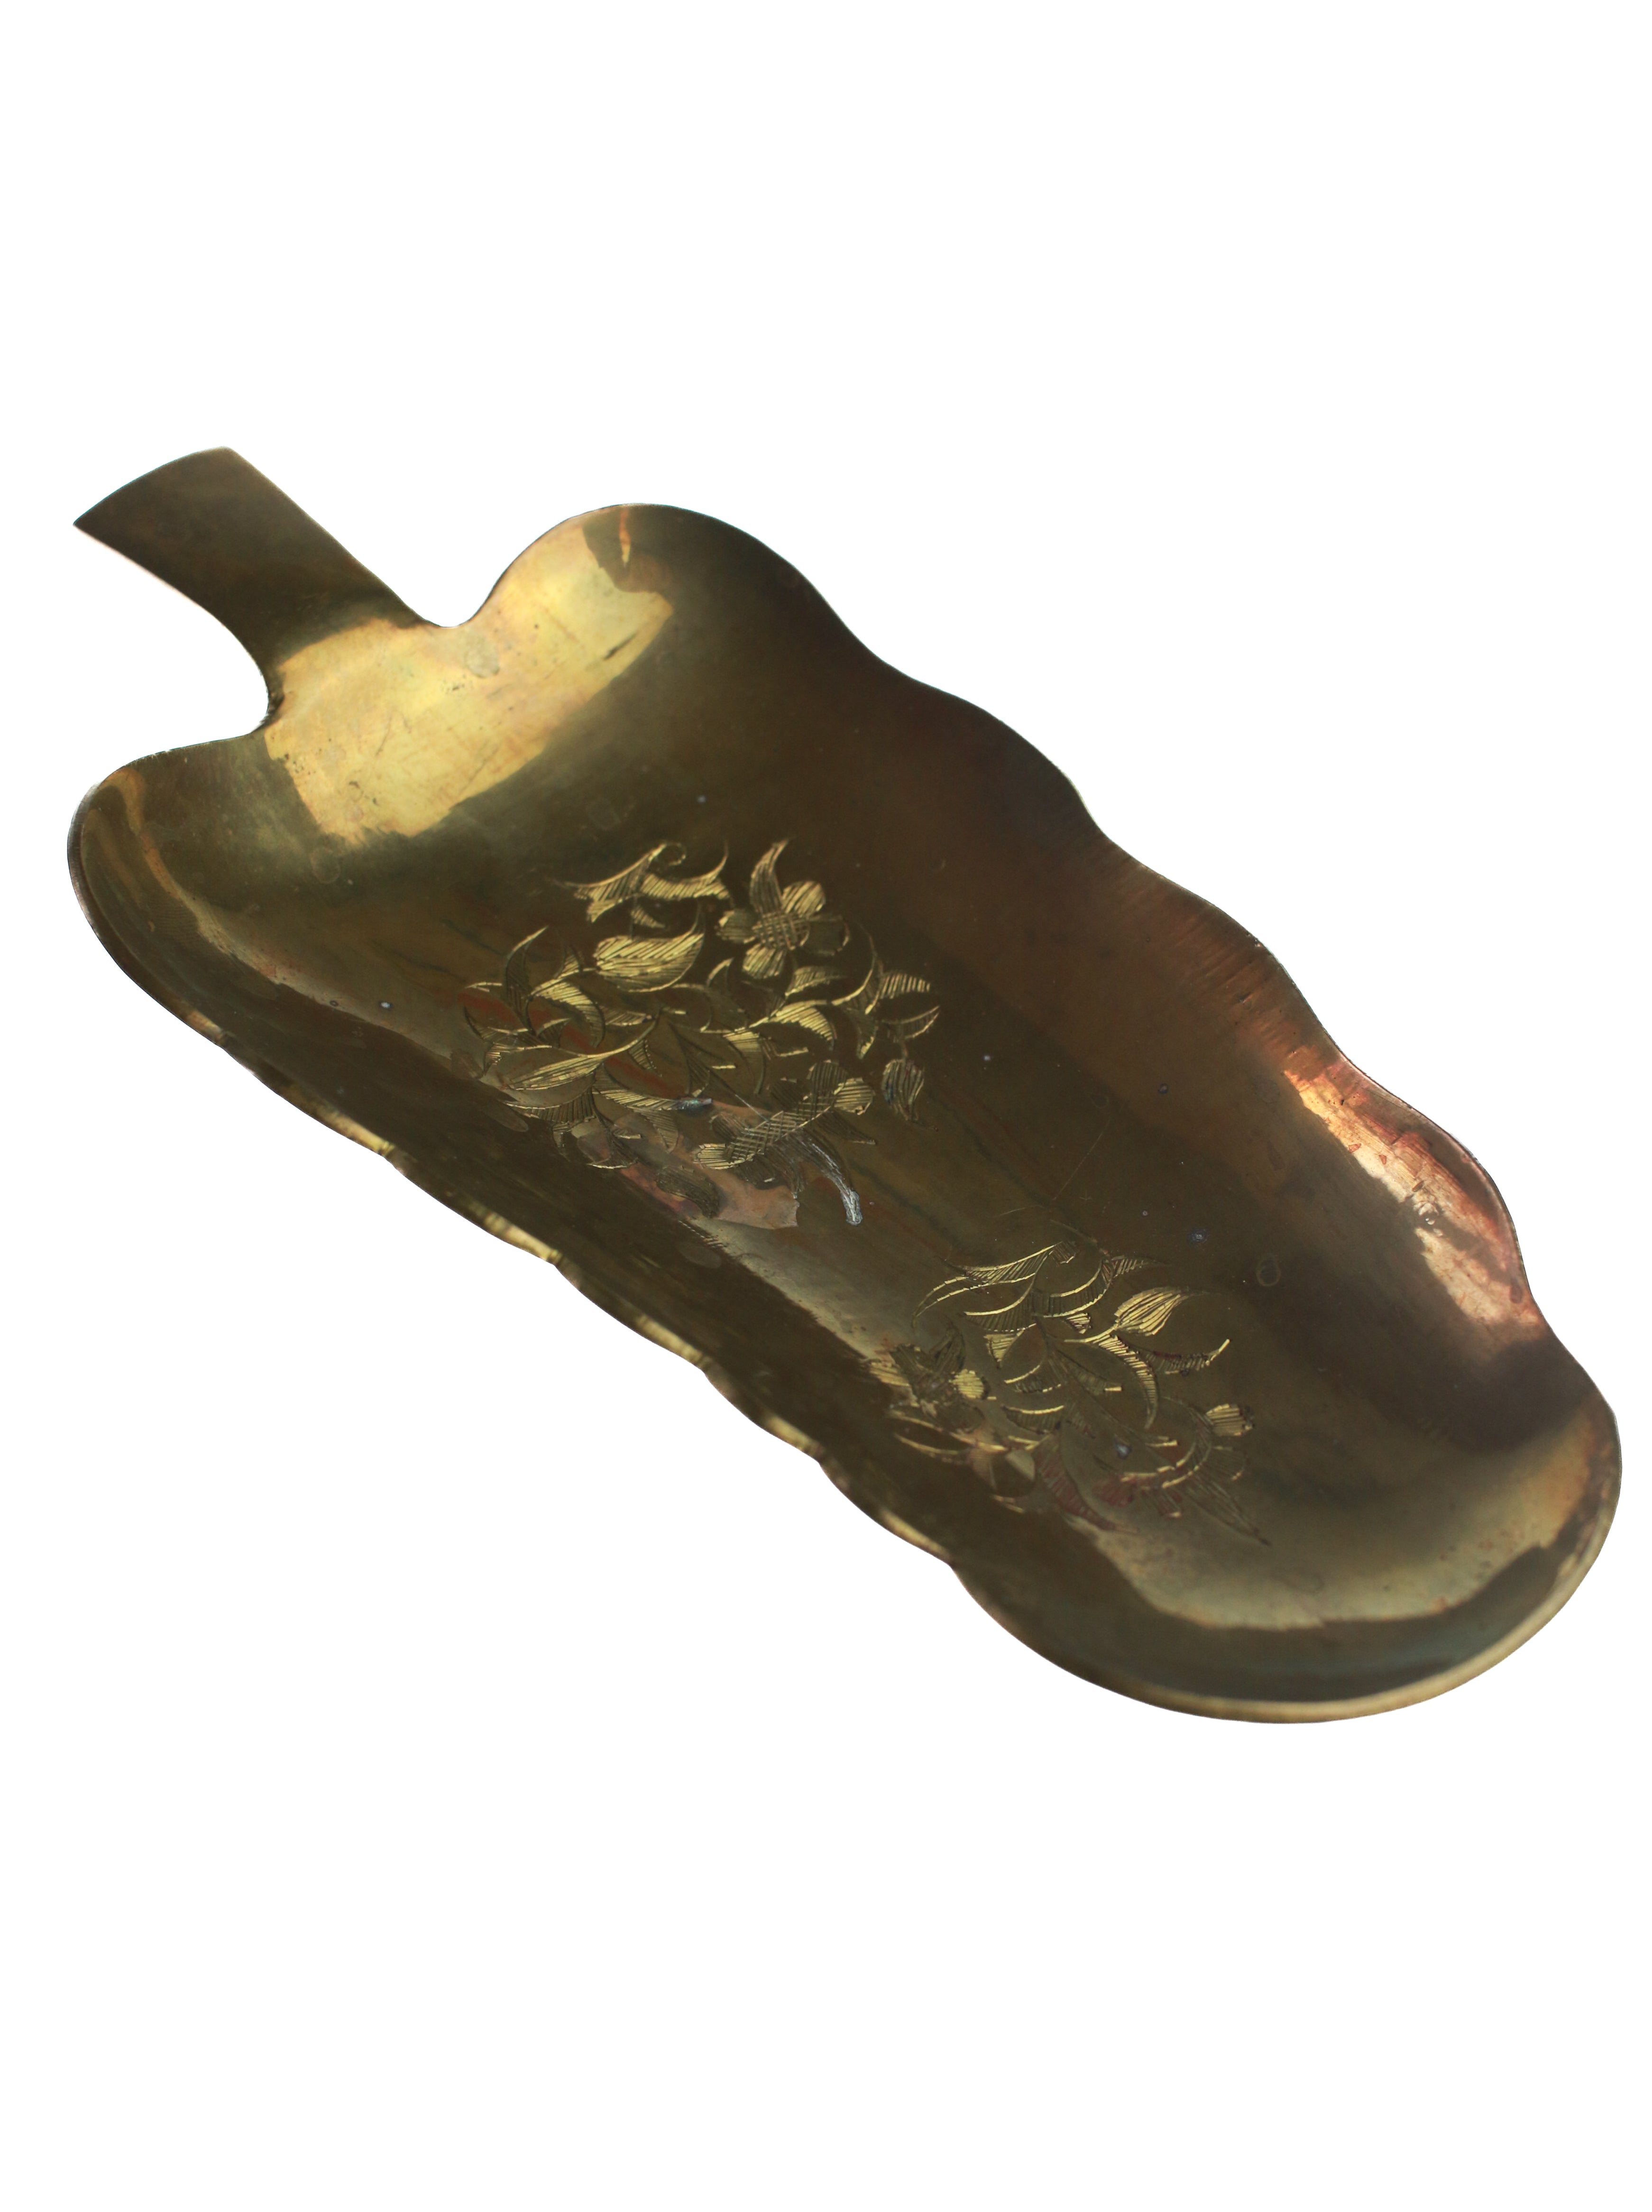 Etched Brass Spoon Rest